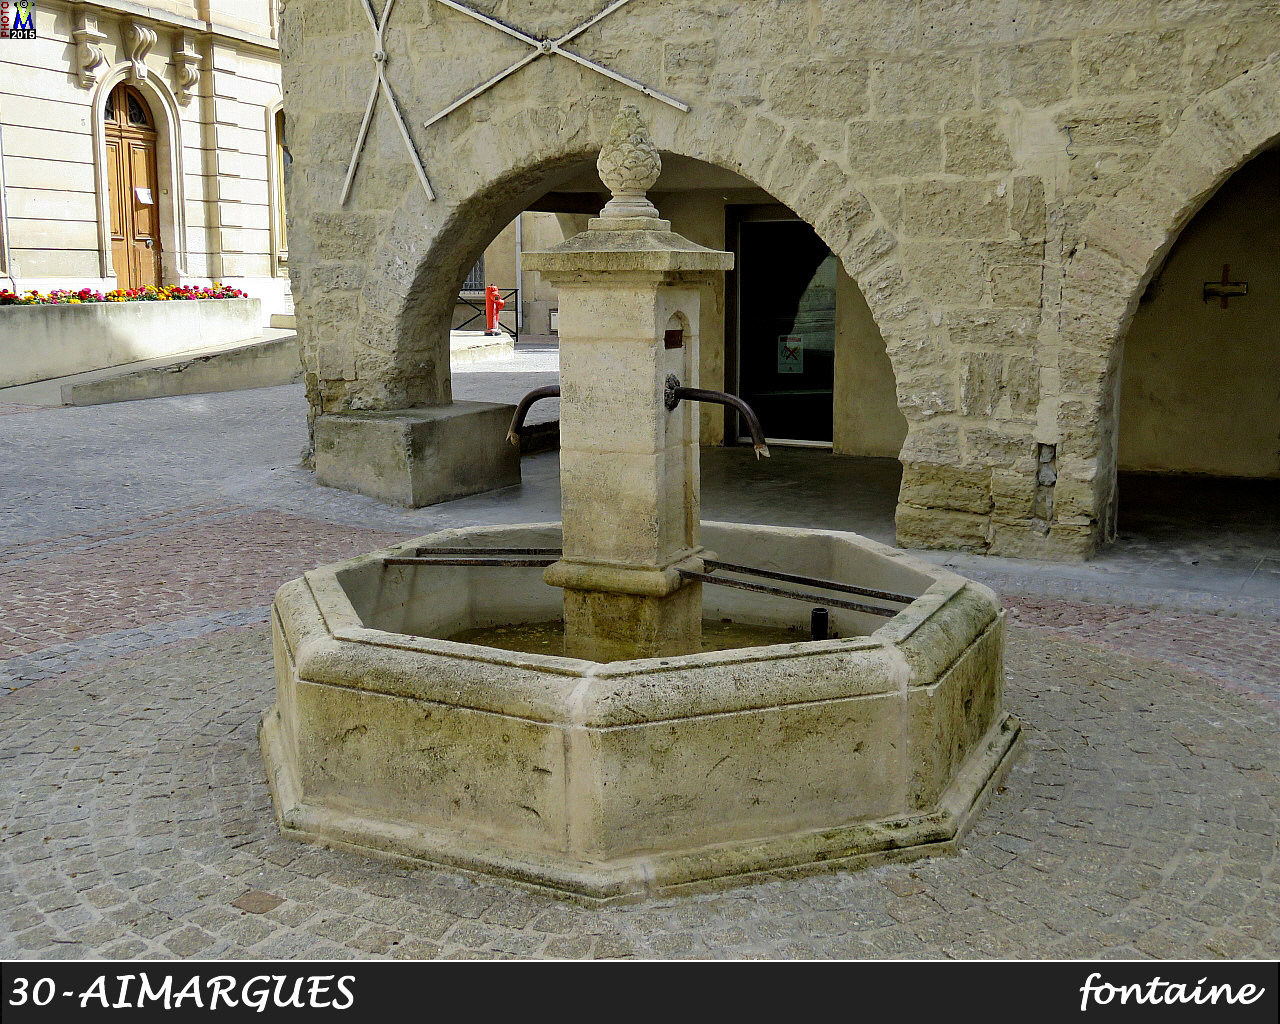 30AIMARGUES_fontaine_100.jpg